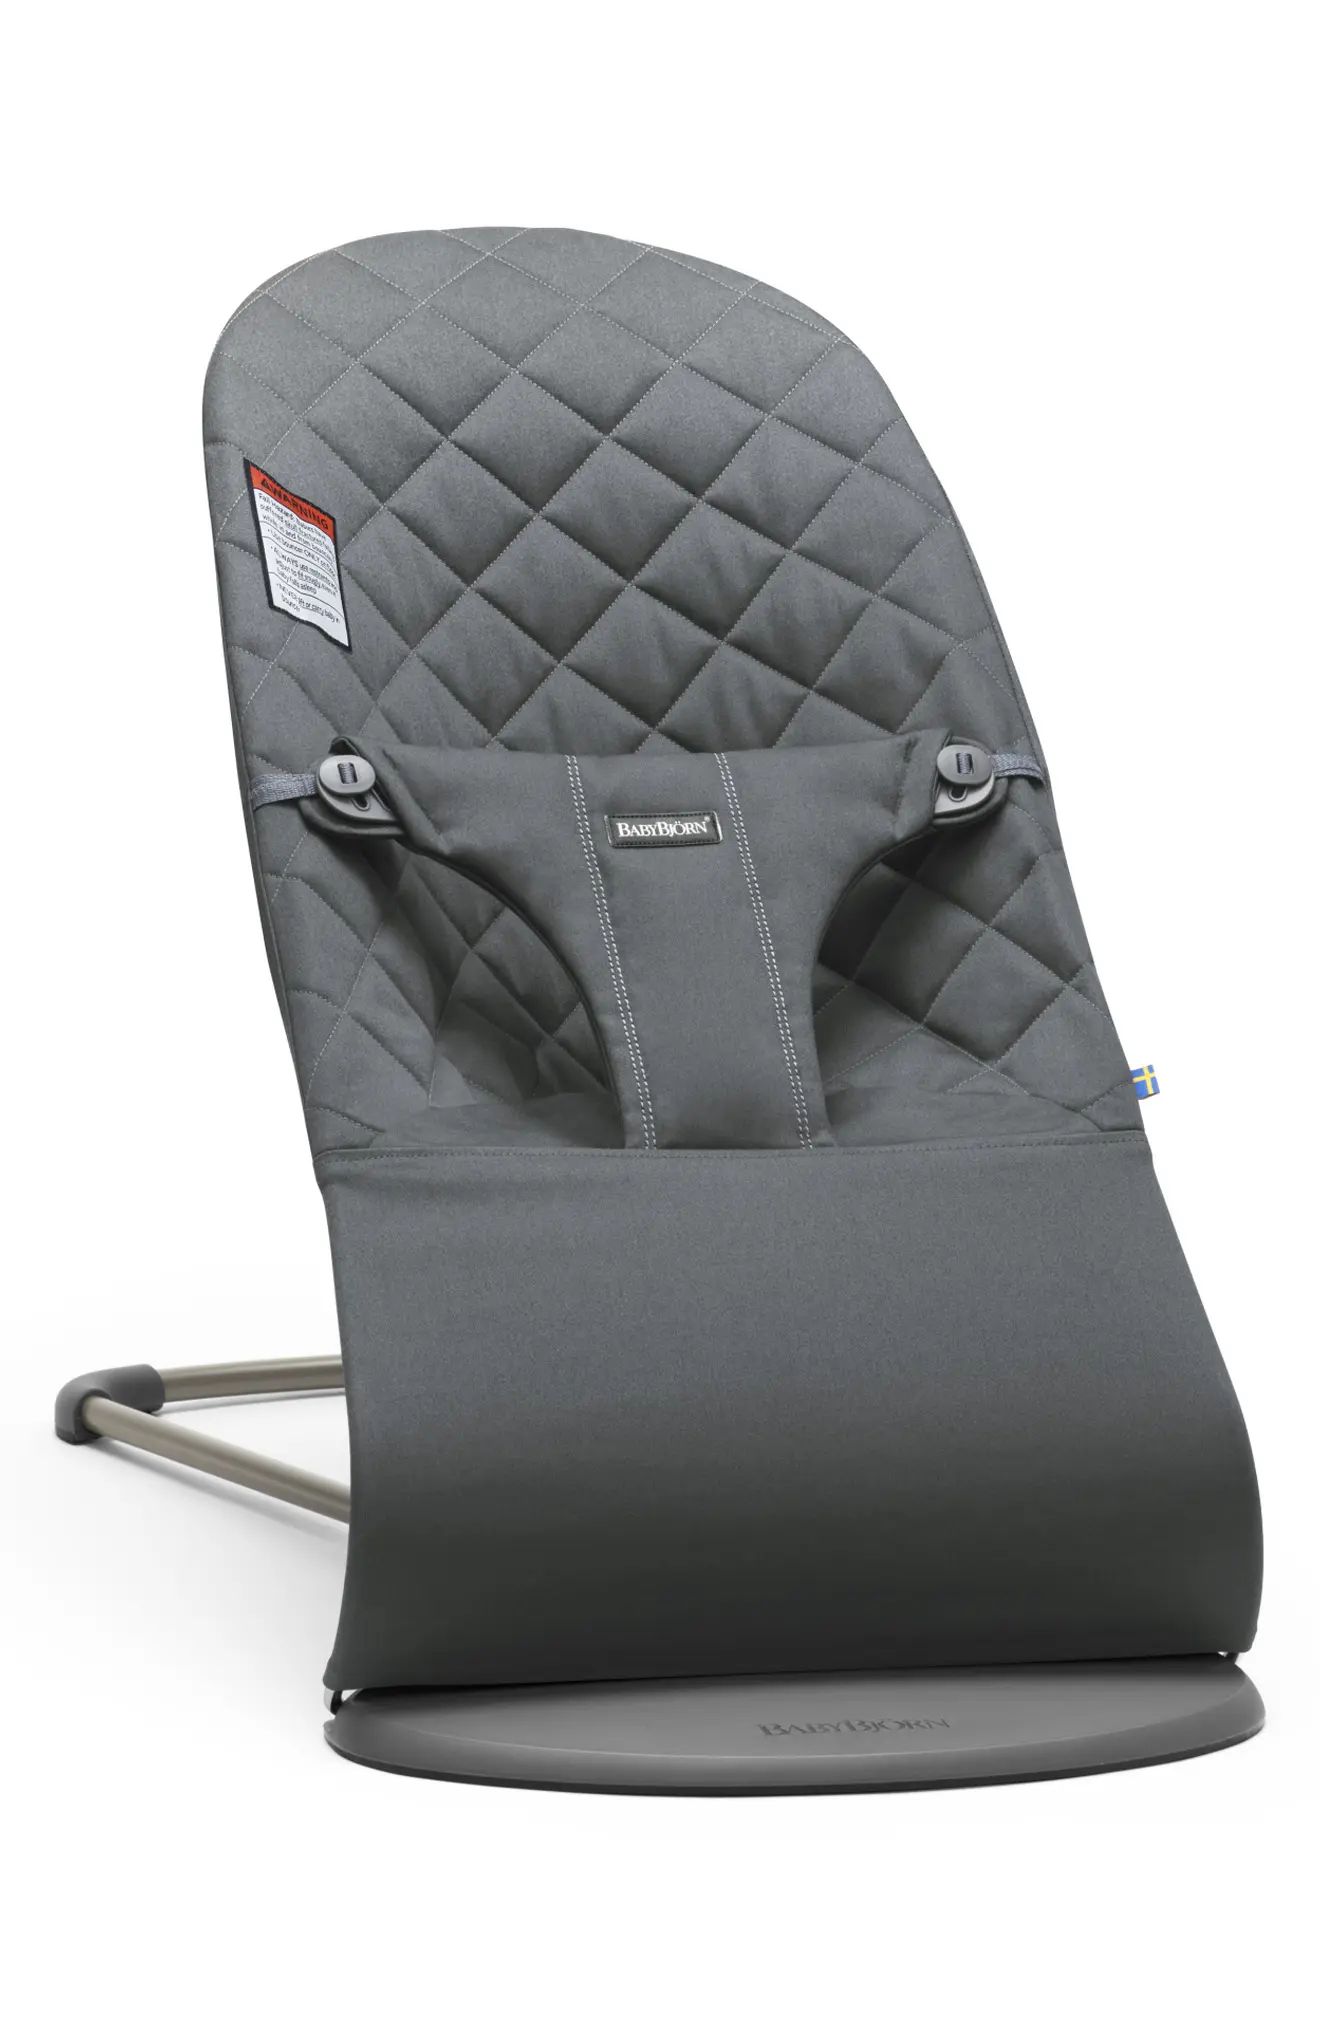 BabyBjorn Bouncer Bliss Convertible Quilted Baby Bouncer in Anthracite at Nordstrom | Nordstrom